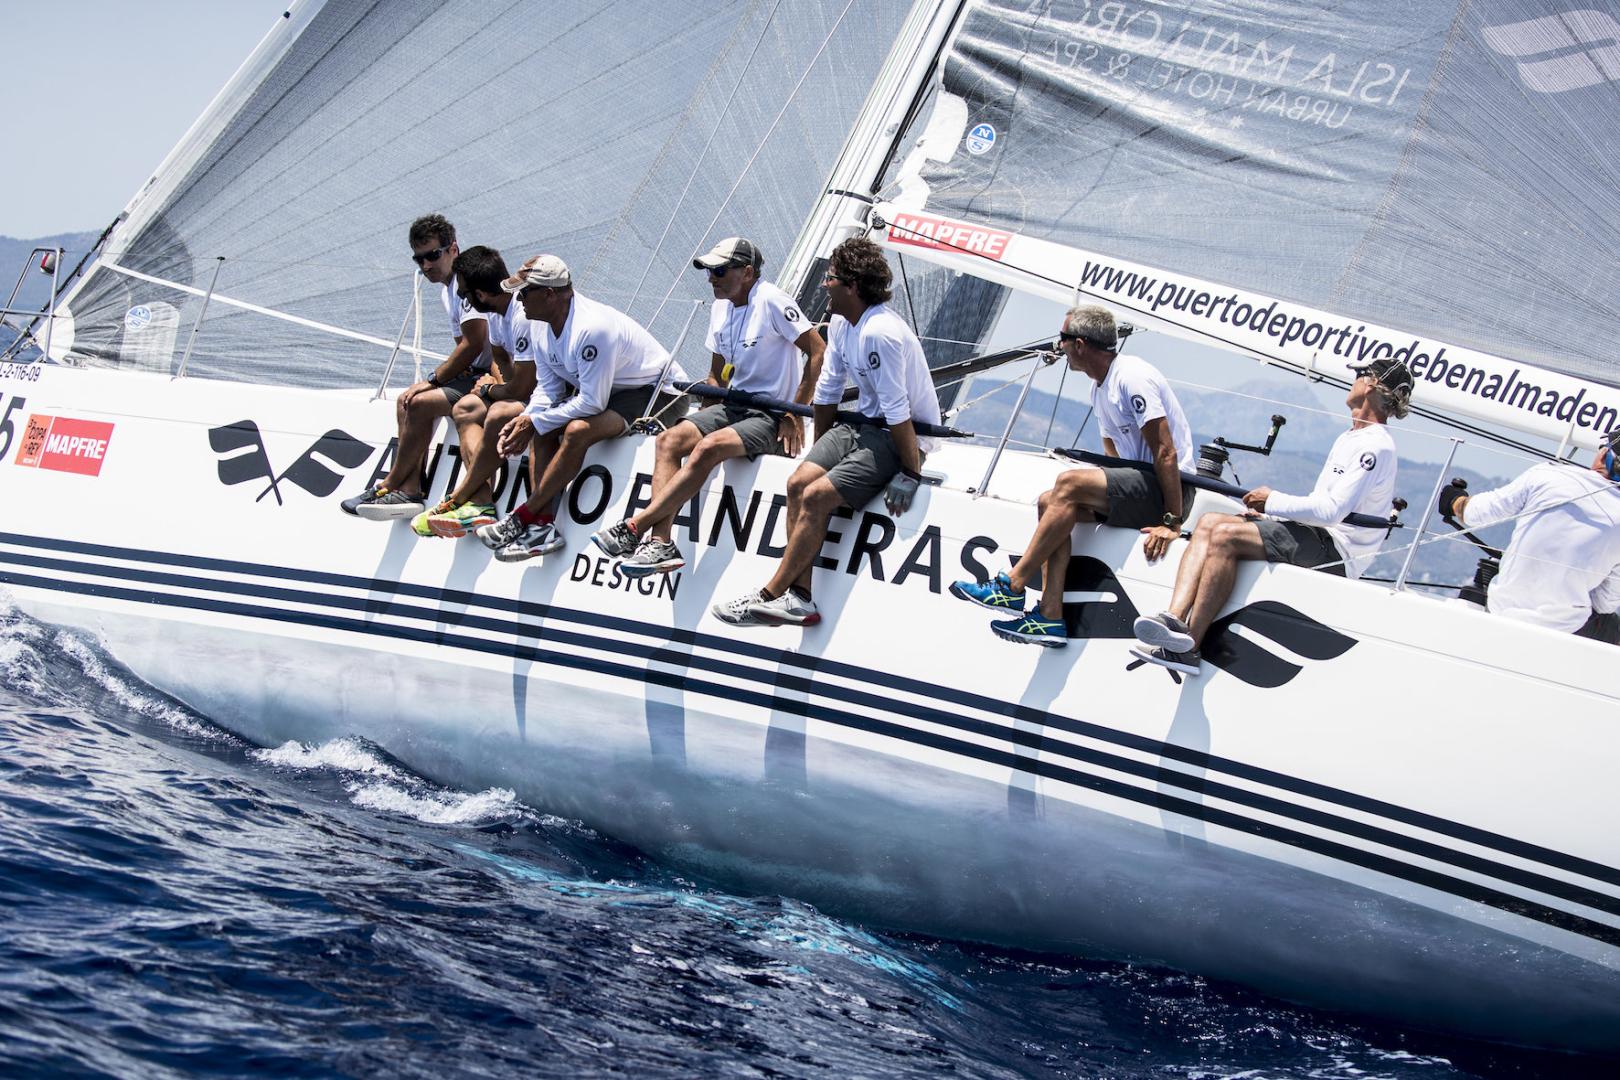 BMW ORC, the largest fleet of the Copa del Rey MAPFRE